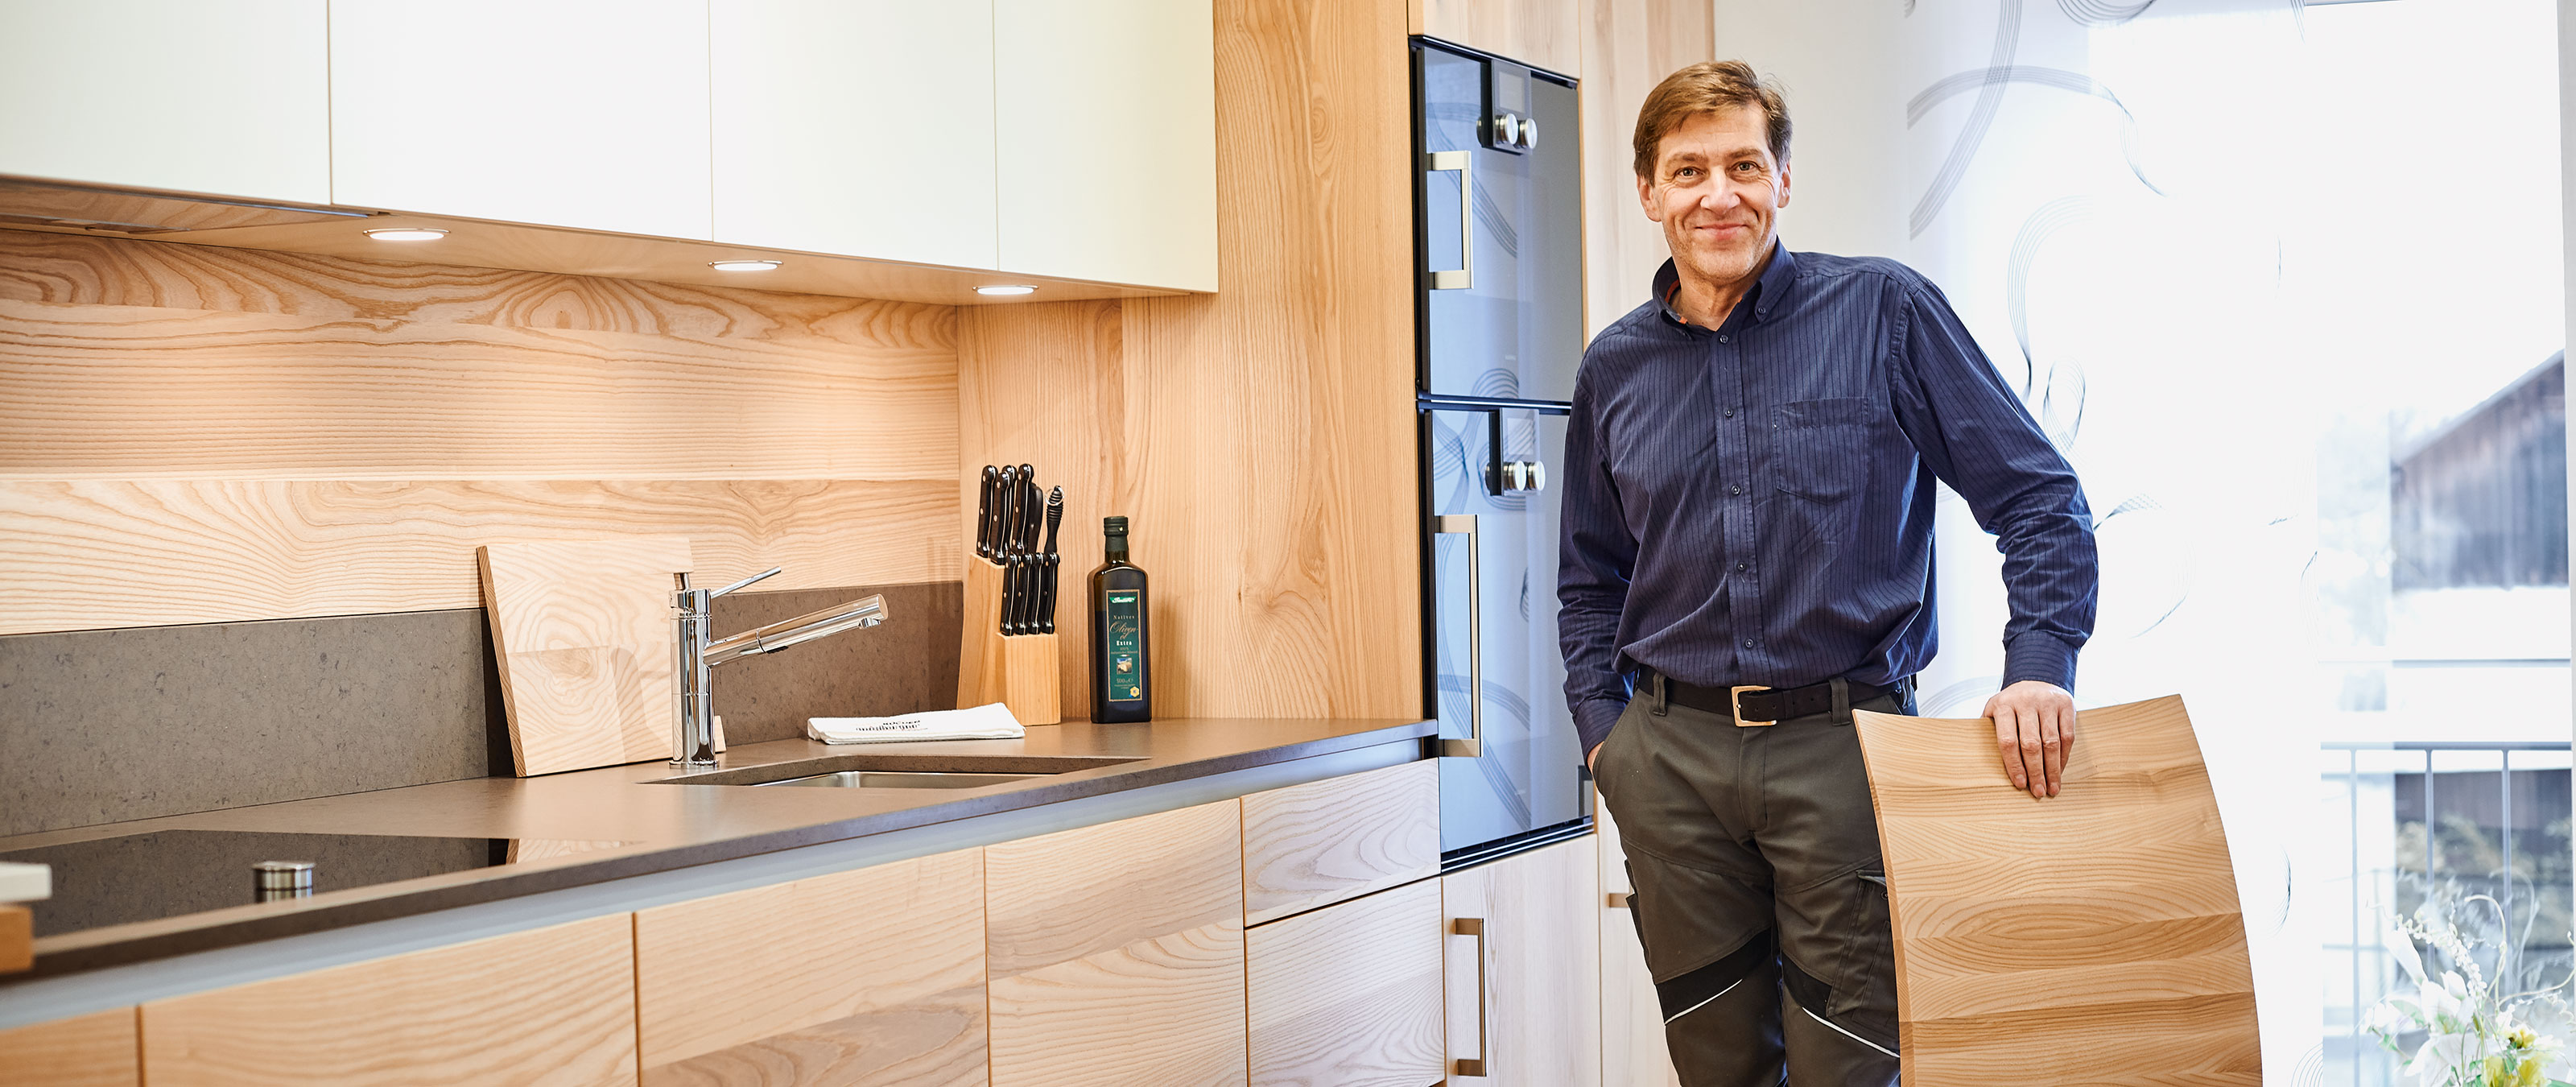 Bespoke kitchens: quality is master joiner Martin Geisberger's top priority